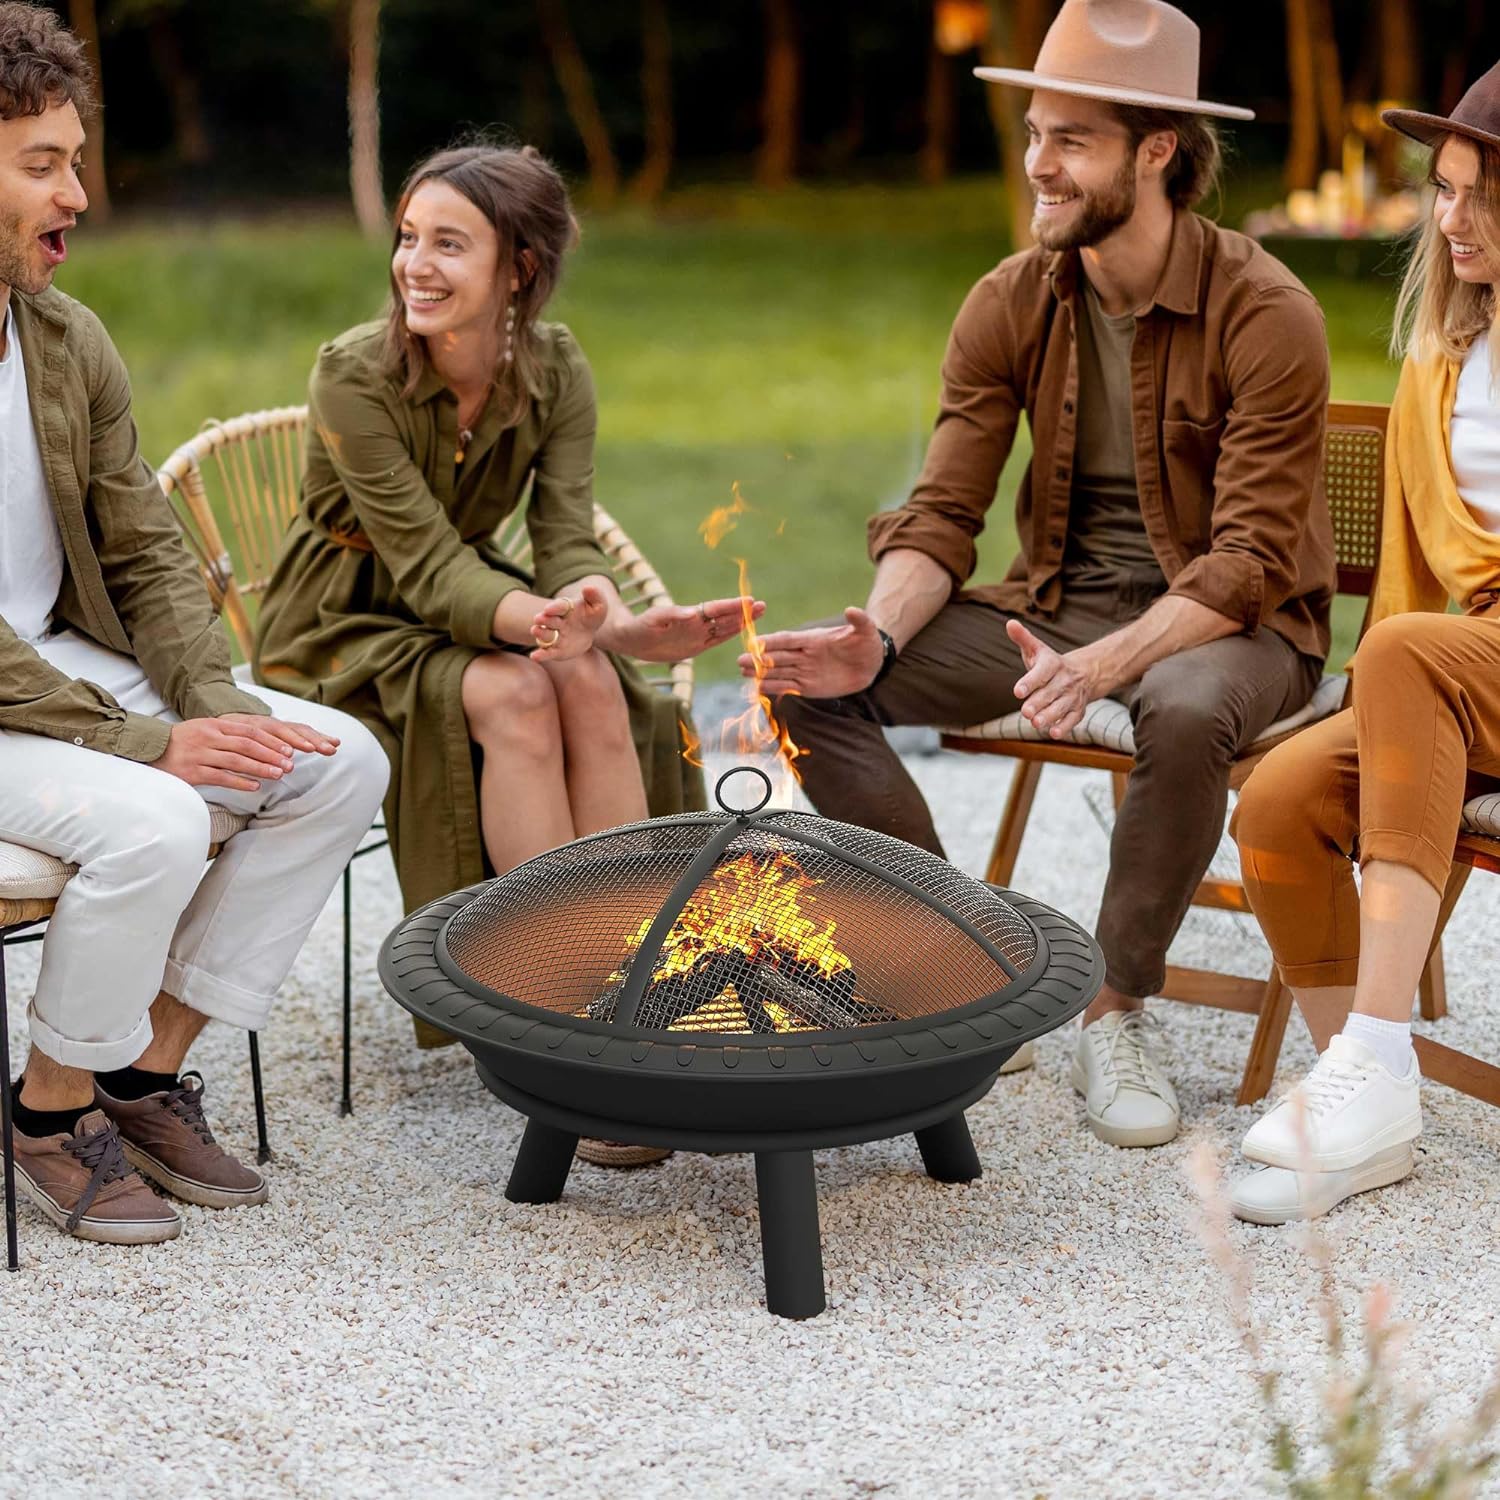 YITAHOME 25.6in Steel Replacement Fire Bowl with Round Spark Screen, Poker and Detachable Grate, Wood-Burning Fire Pit Bowl for DIY or Existing Outdoor Patio Fire Pit